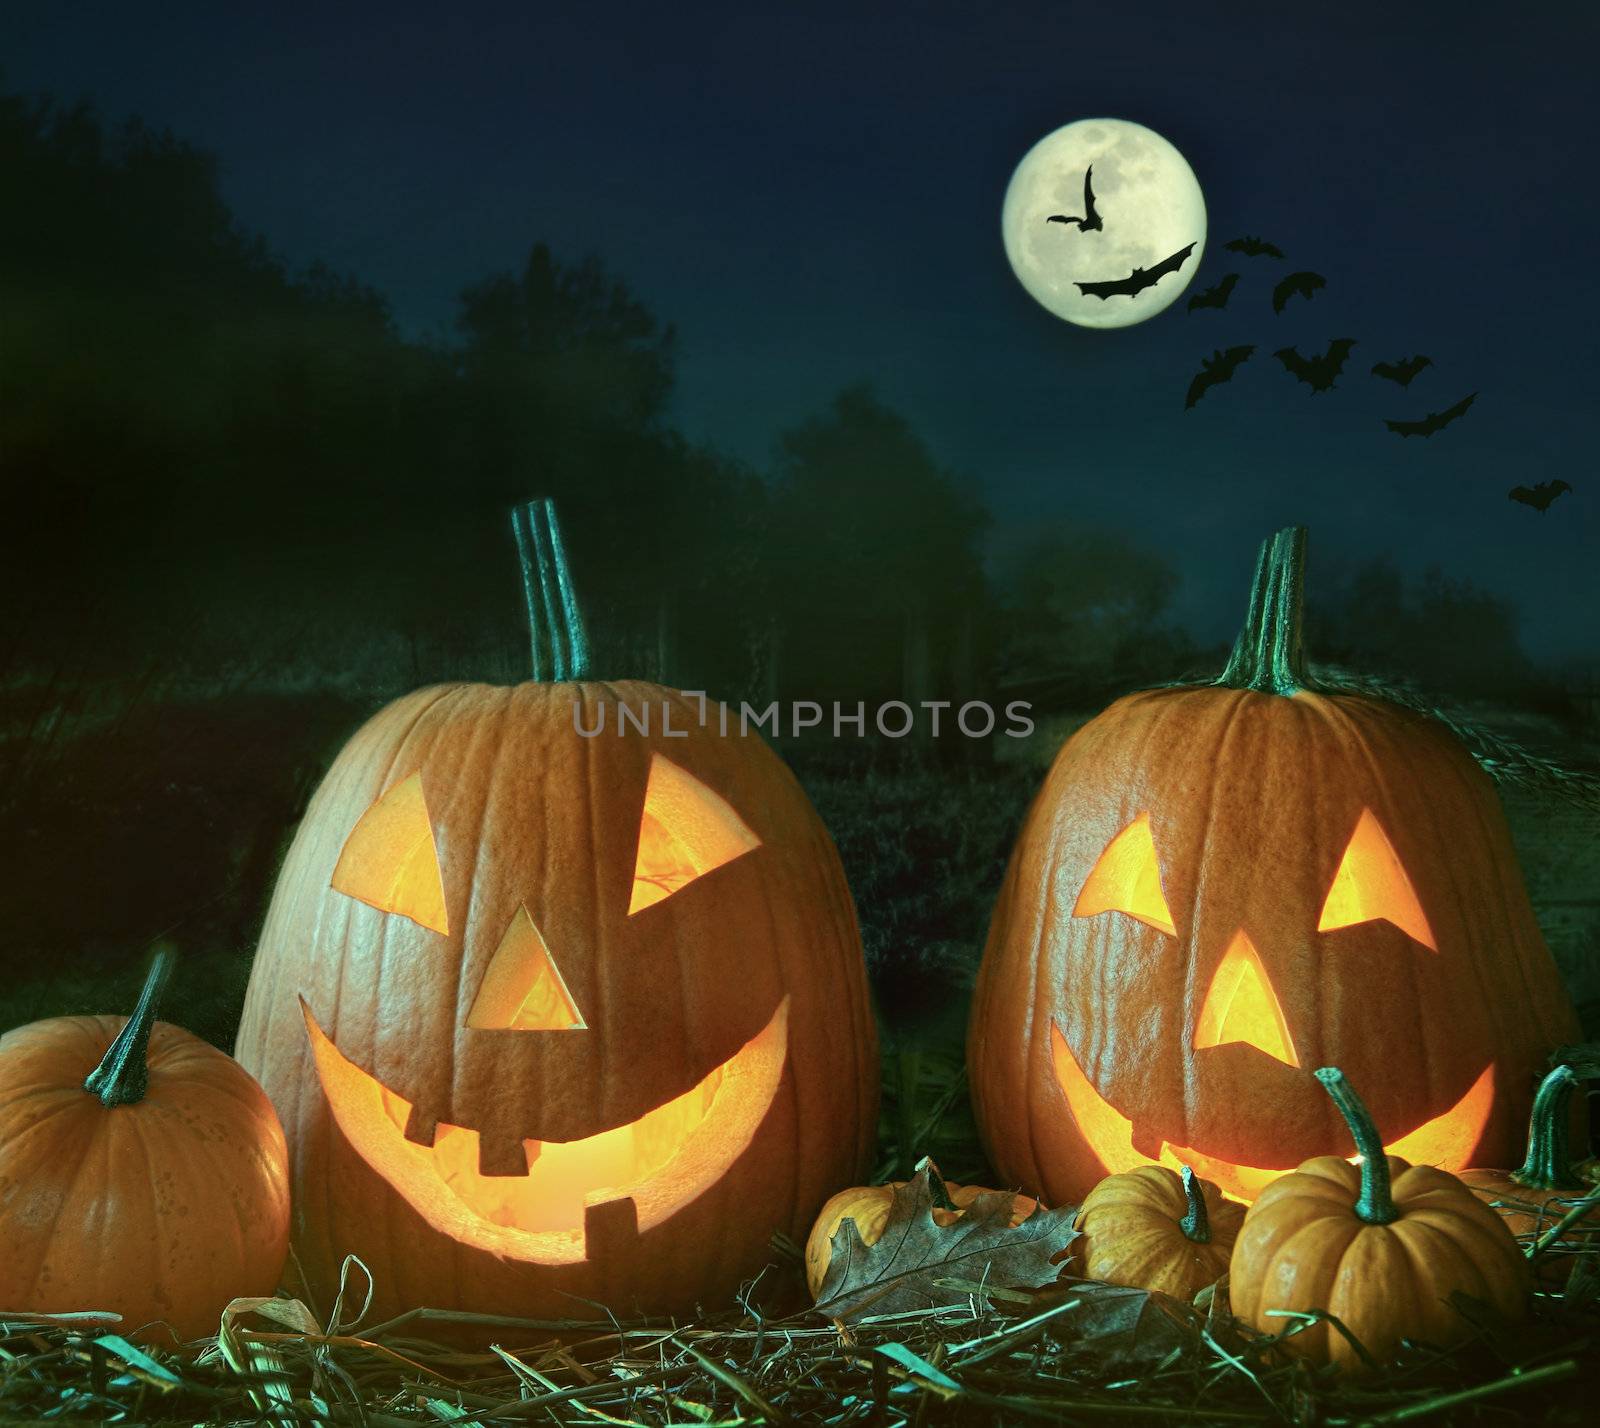 Night scene with Halloween pumpkins and moom by Sandralise